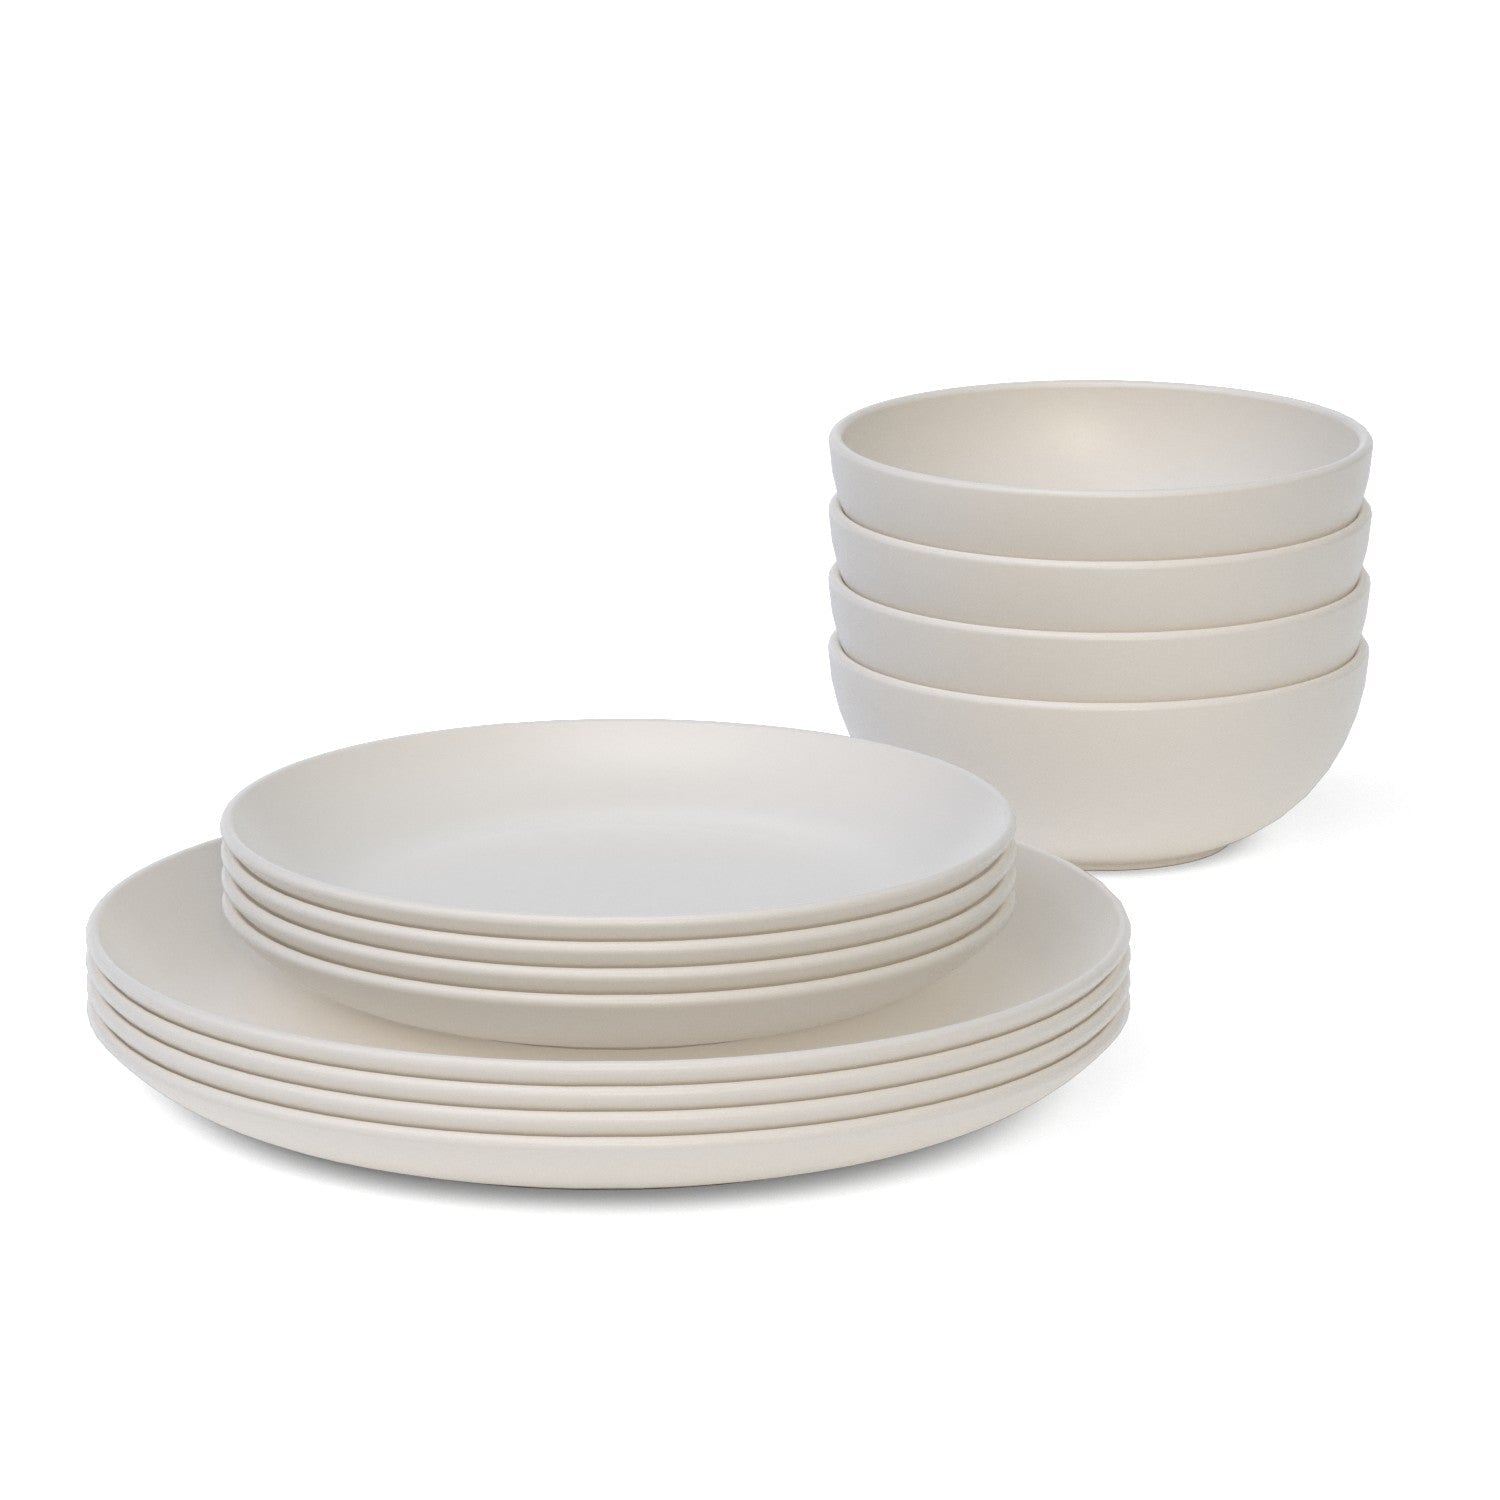 24 oz Round Cereal Bowl Set of 4 - Off White